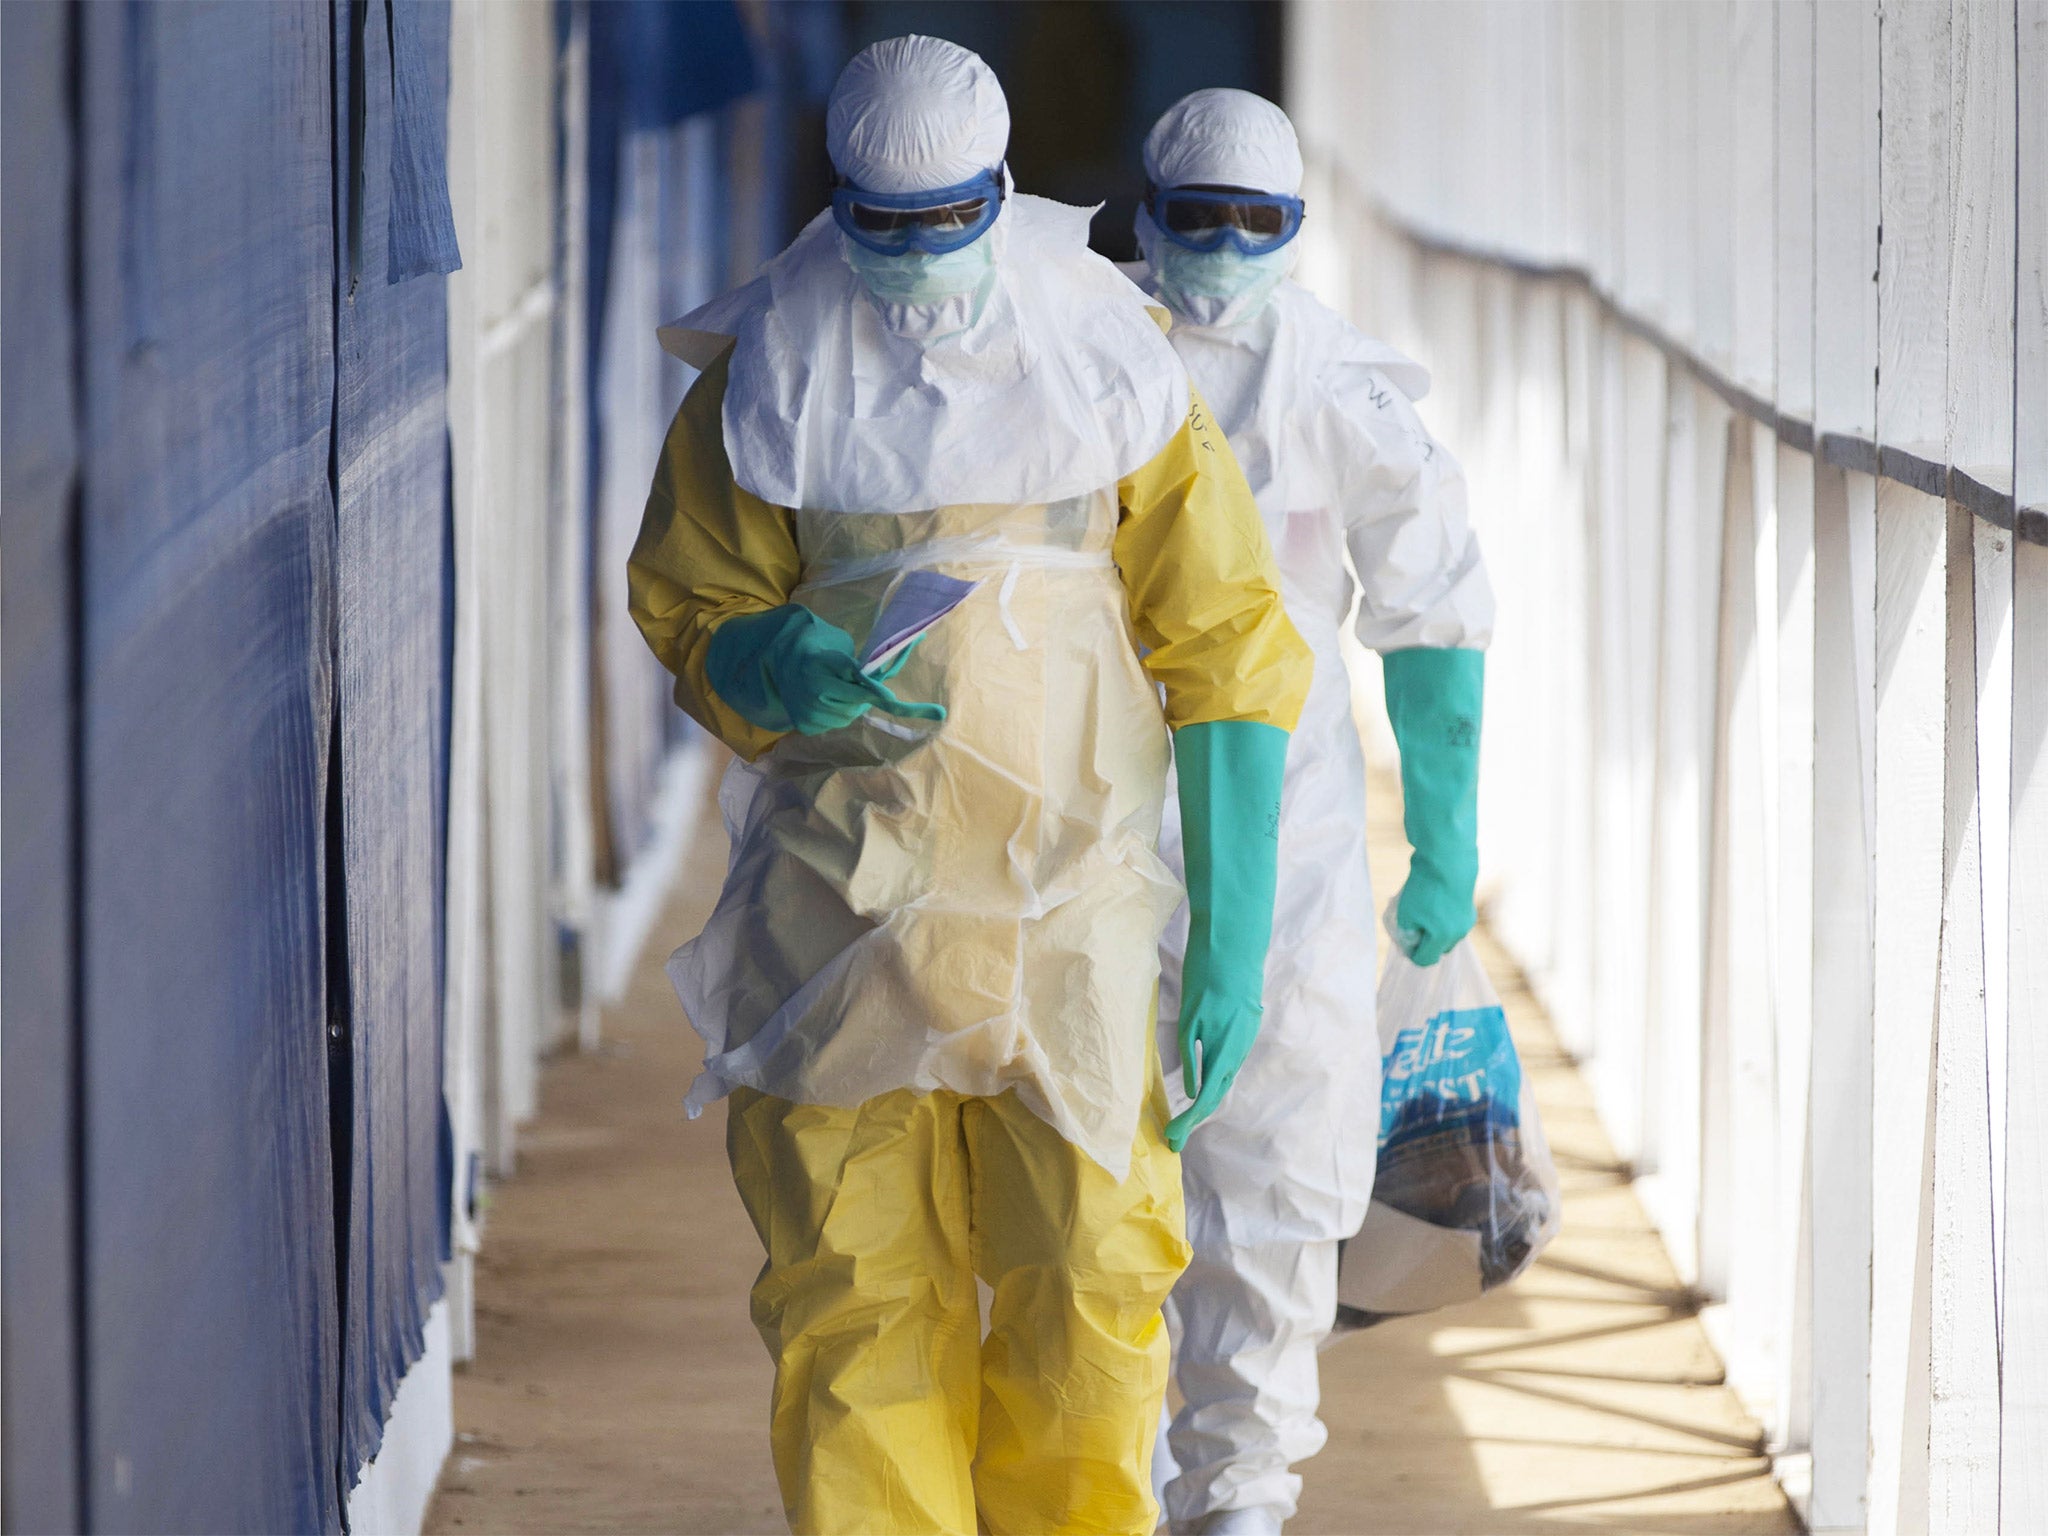 Health care workers at the Kerry Town Ebola Treatment Centre